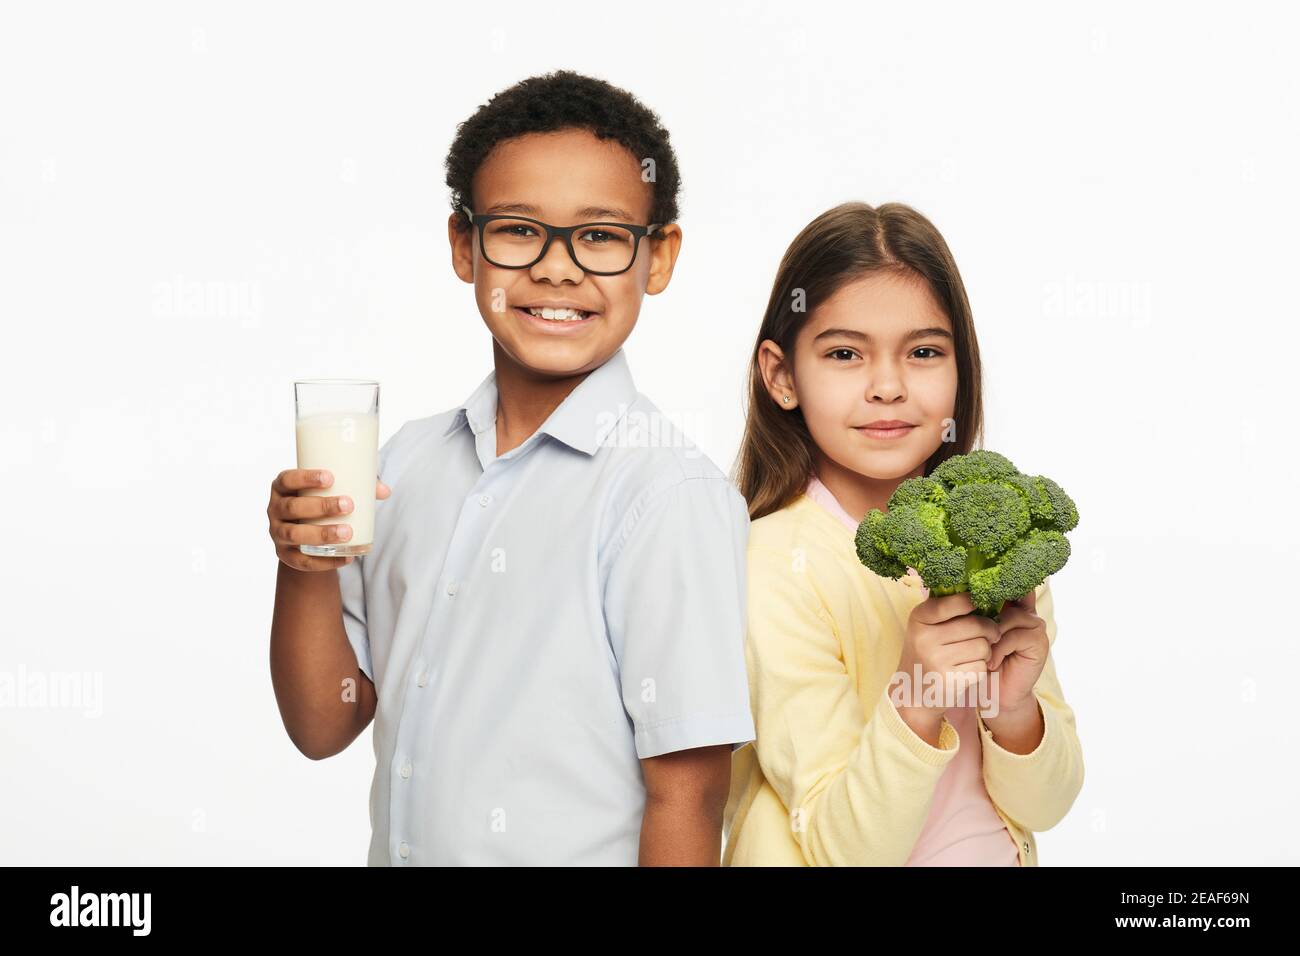 Multiethnic group of children with healthy broccoli and milk. Children's healthy nutrition Stock Photo